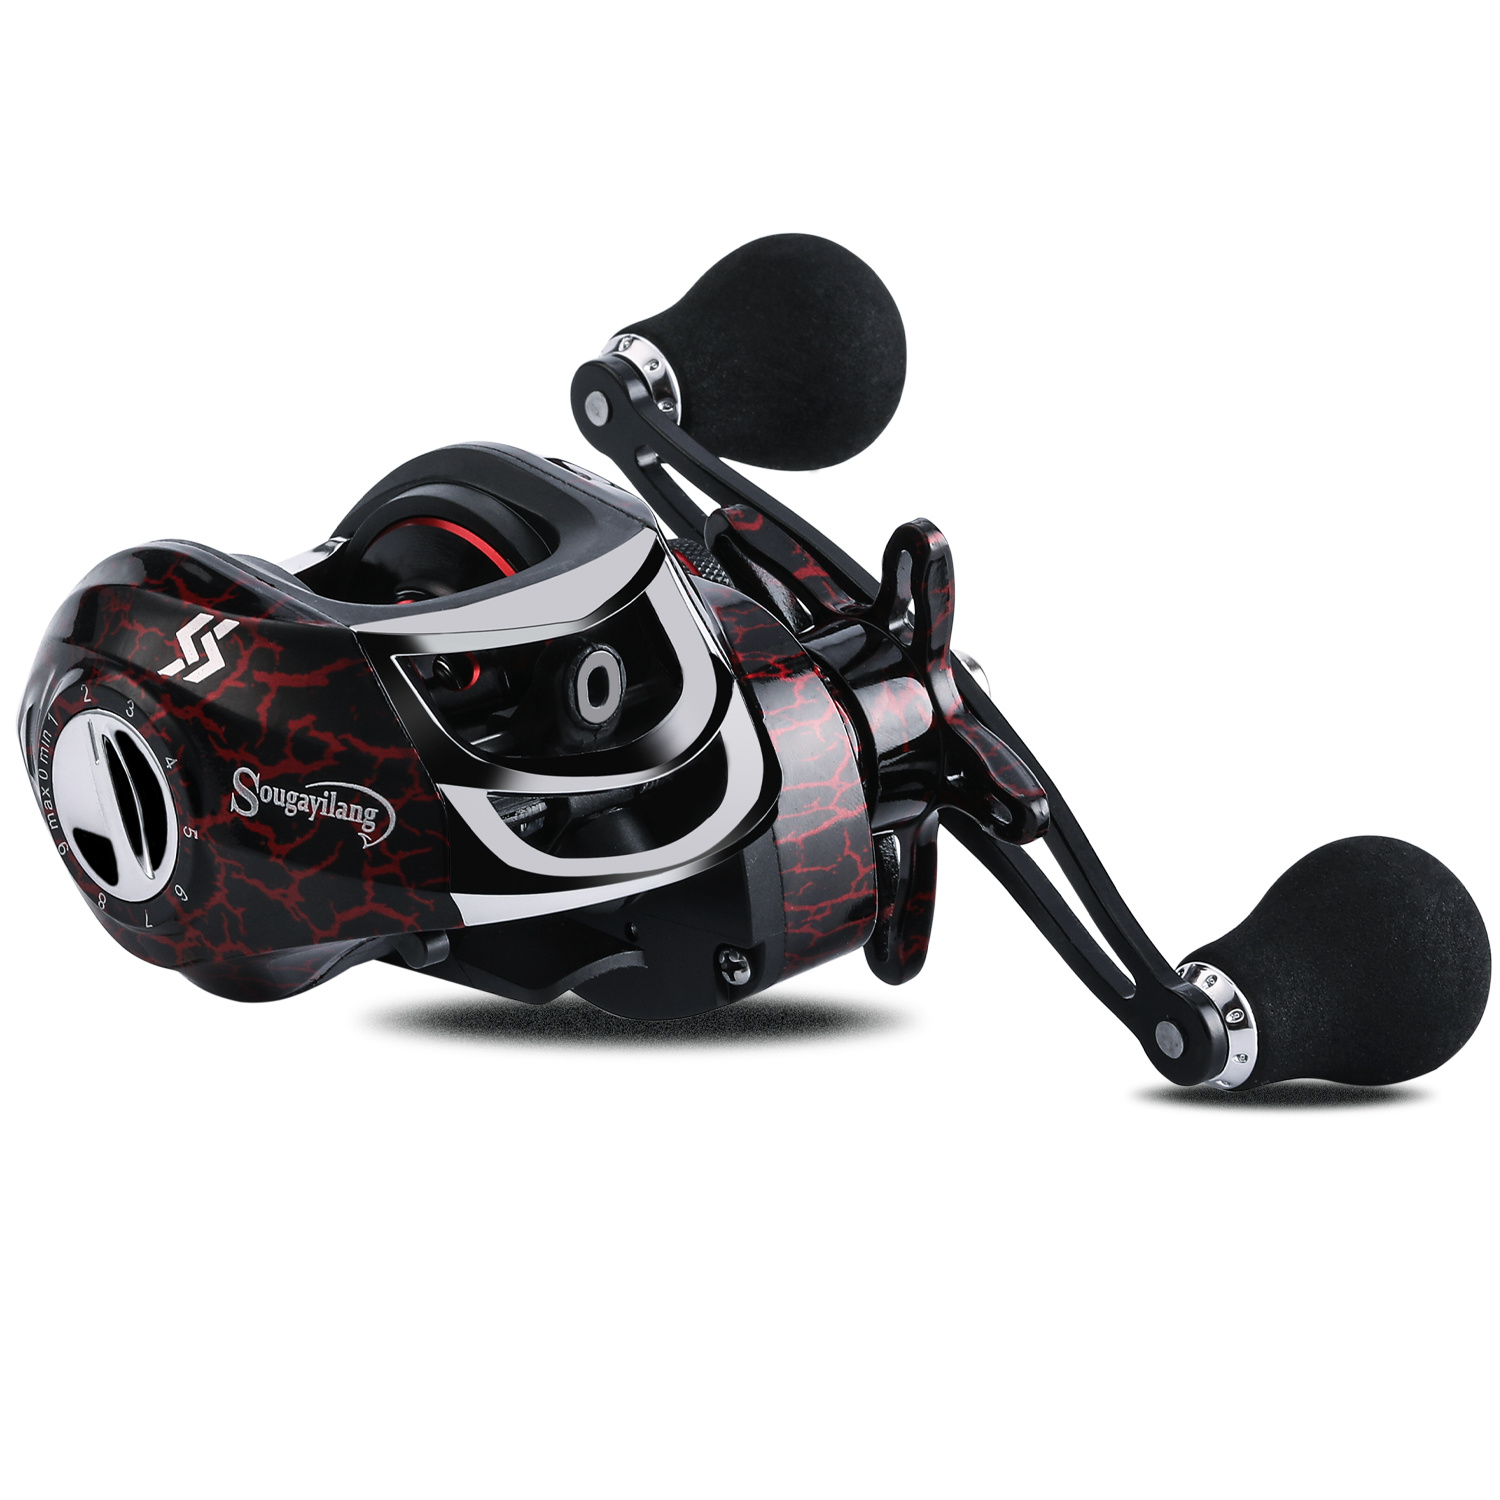 Sougayilang New Baitcasting Reel 7.2:1 High Speed 18+1BB with EVA Handle  for Casting Rod In Fresh Environment 48Hours Cheap Reel